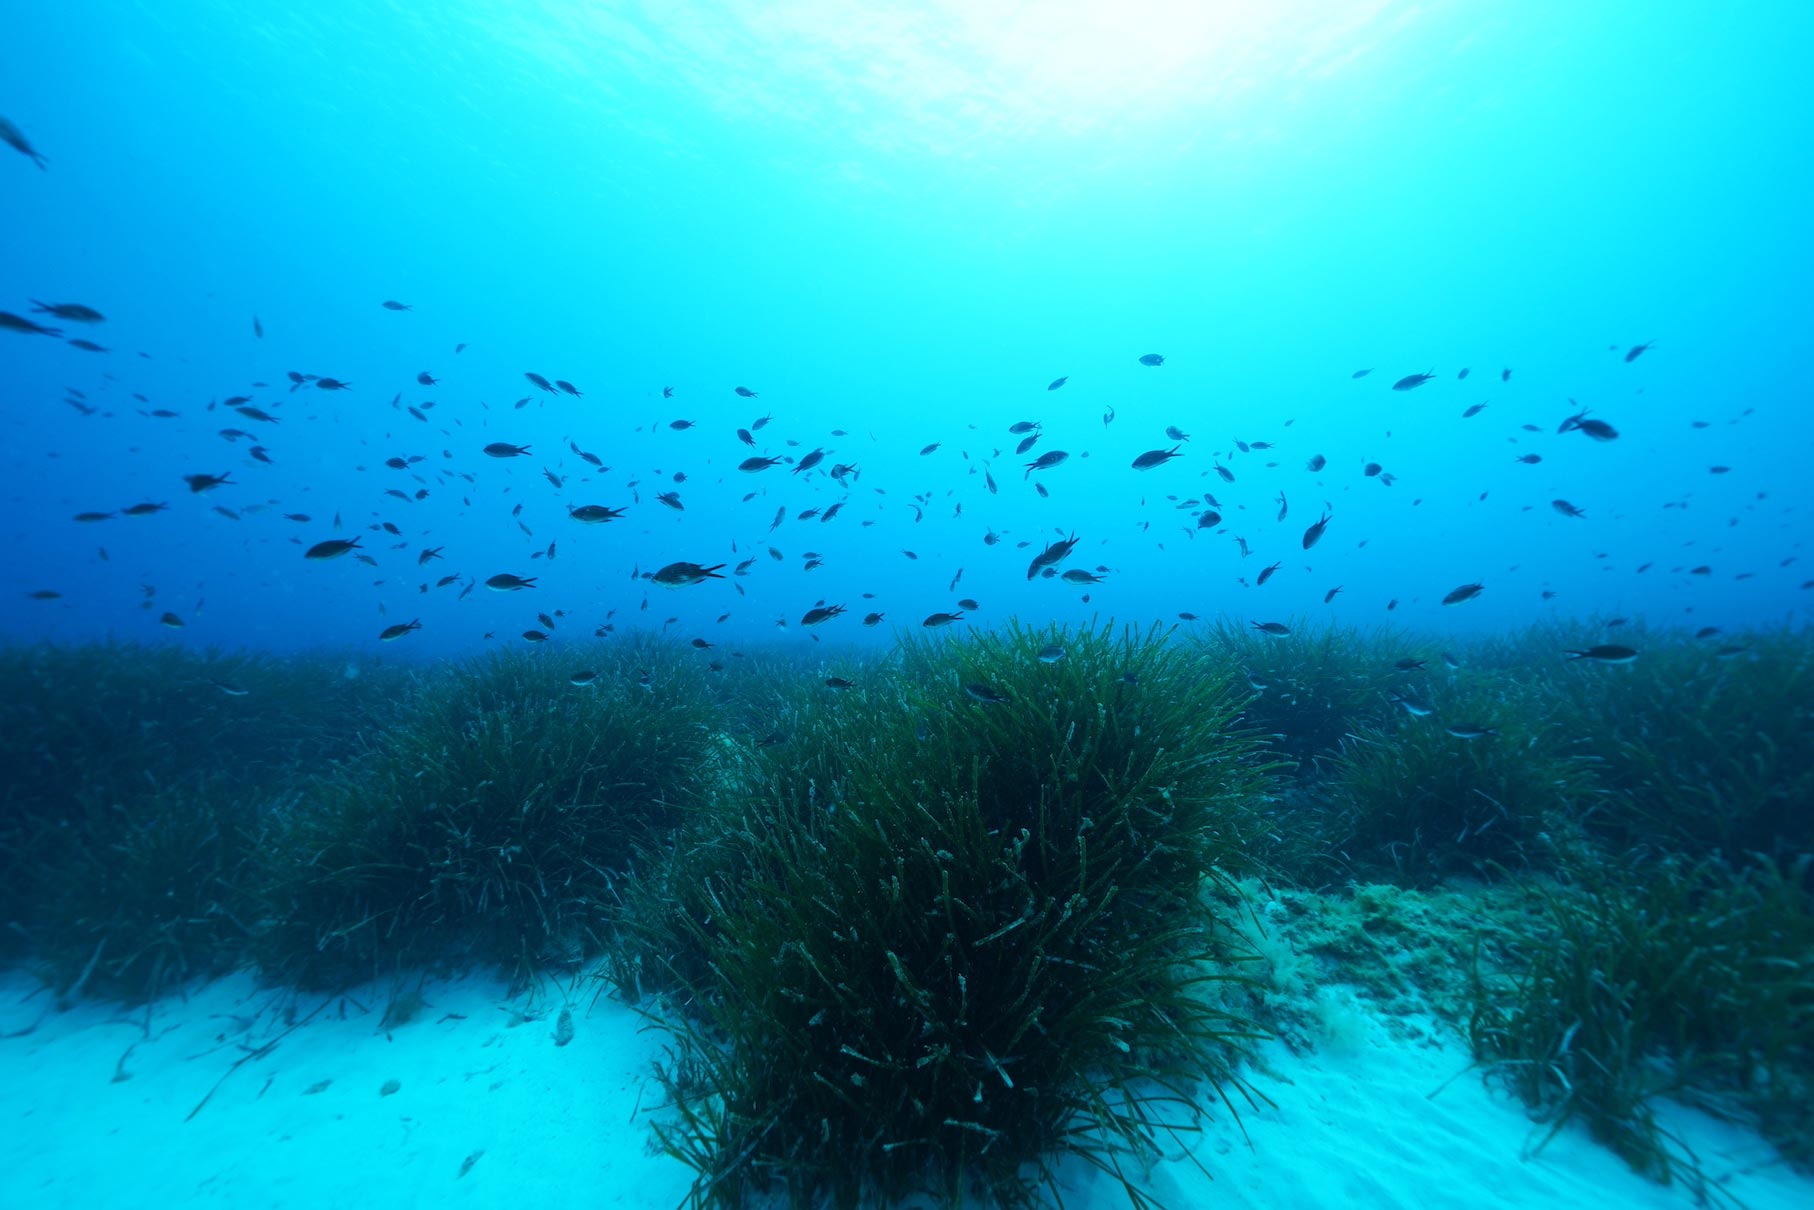 Seagrass Forests Counteract Ocean Acidification